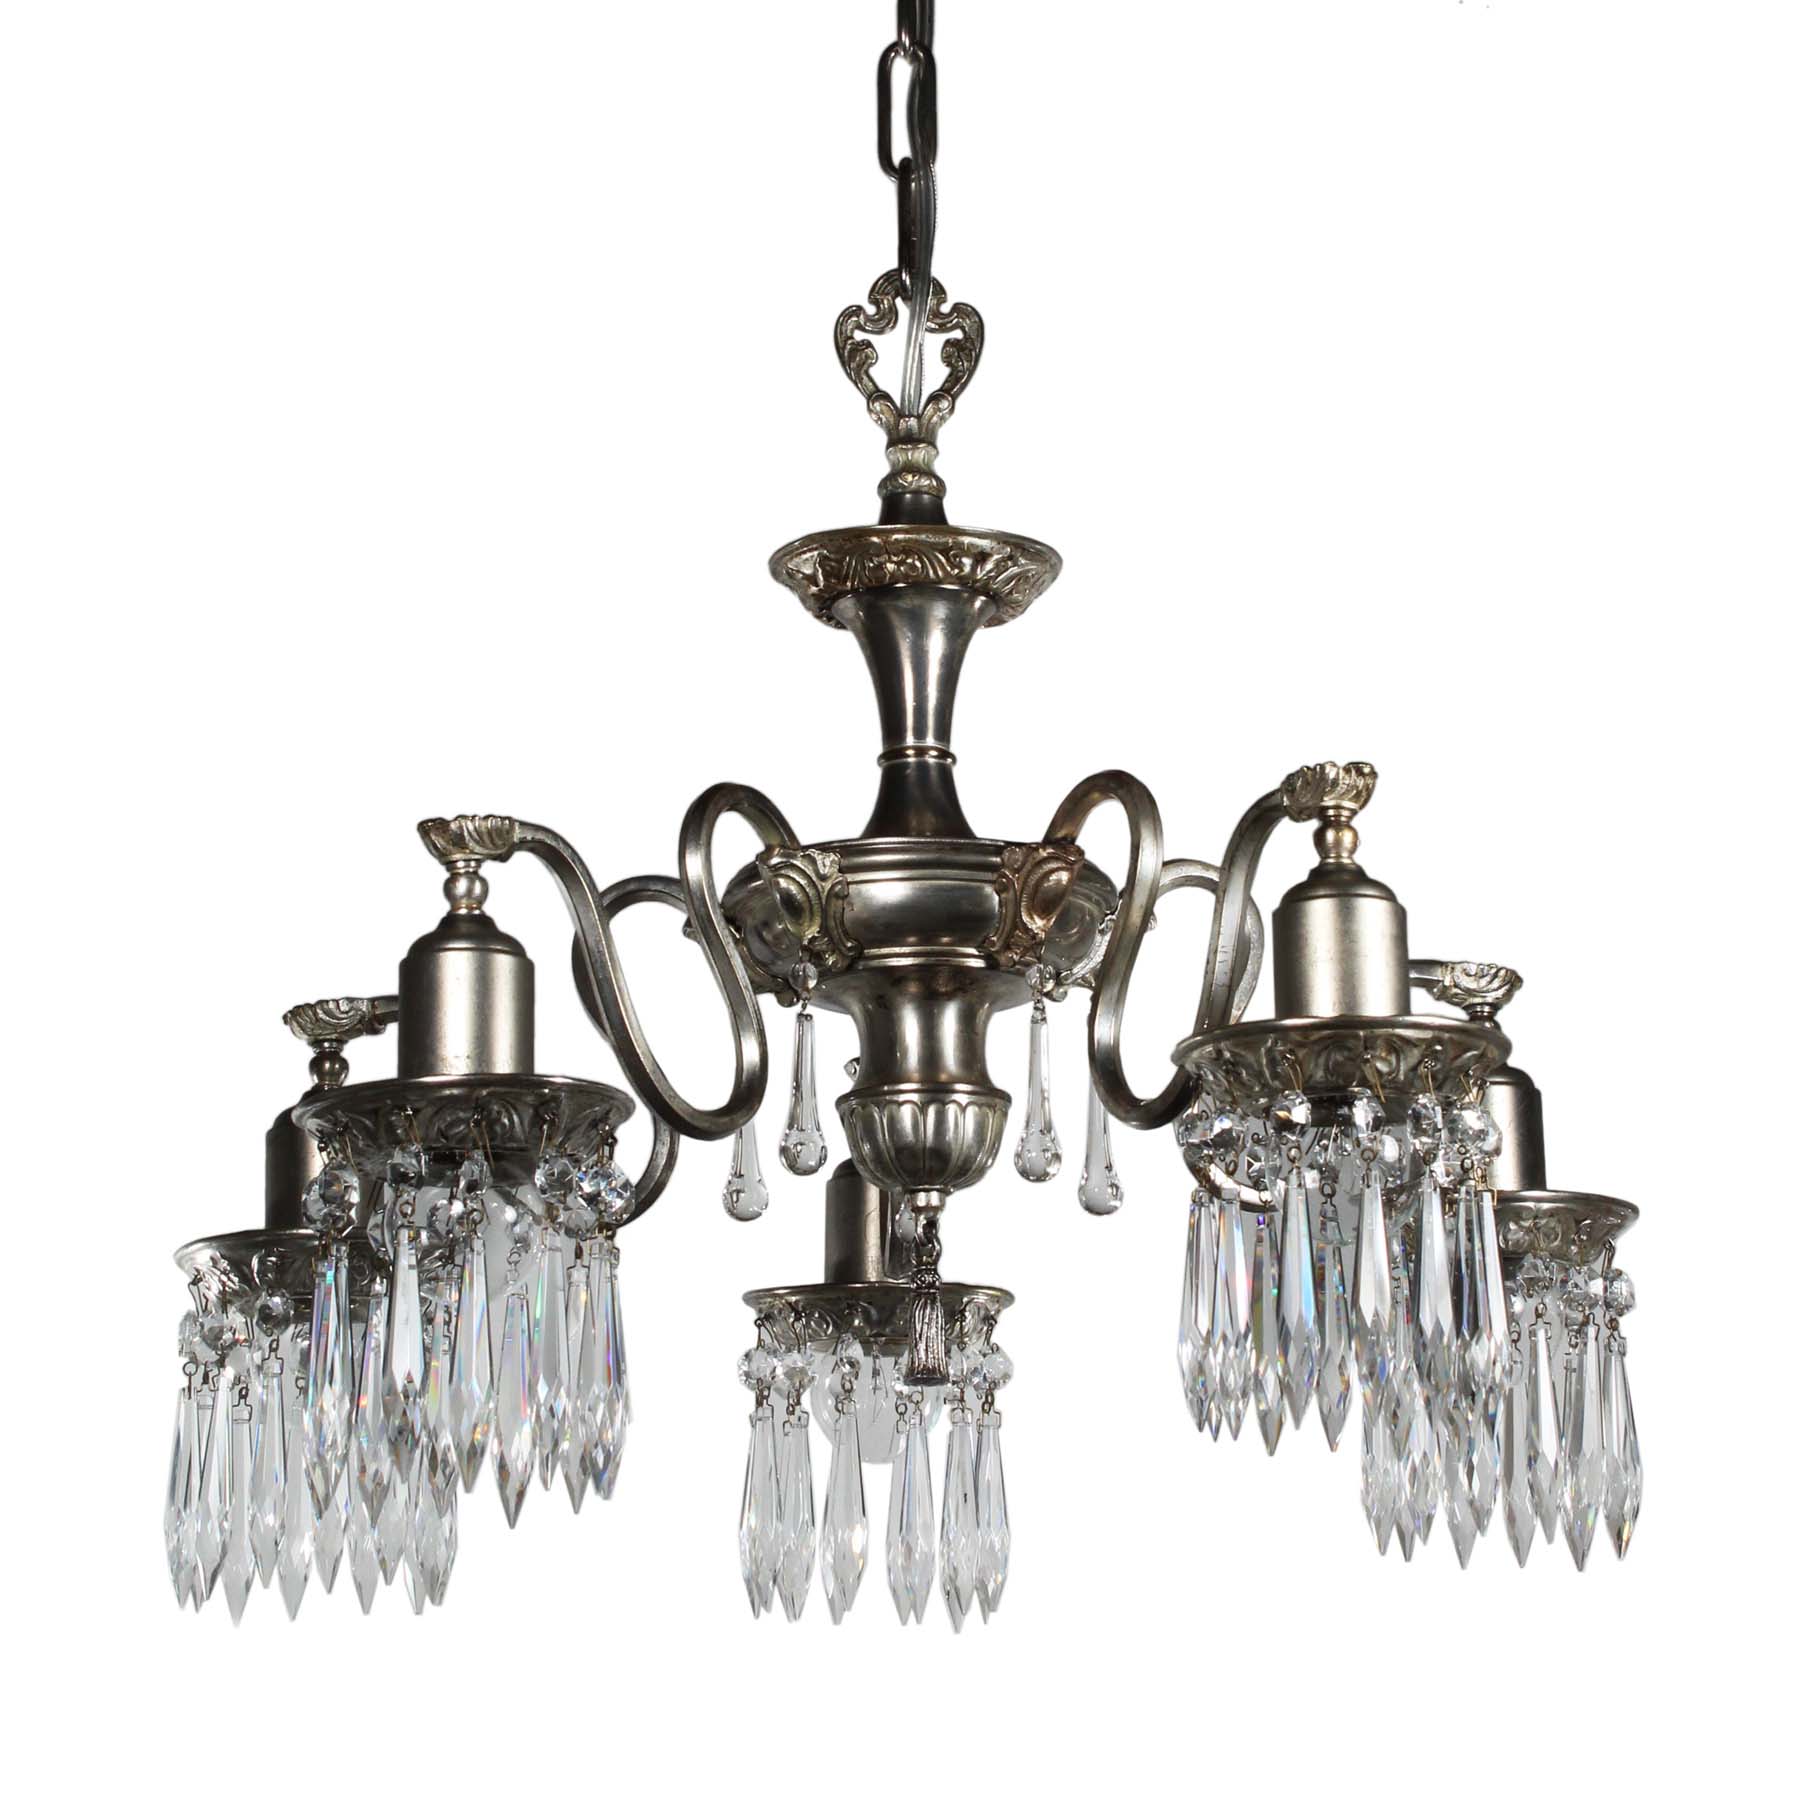 SOLD Antique Neoclassical Silver Plate Chandelier with Prisms-0